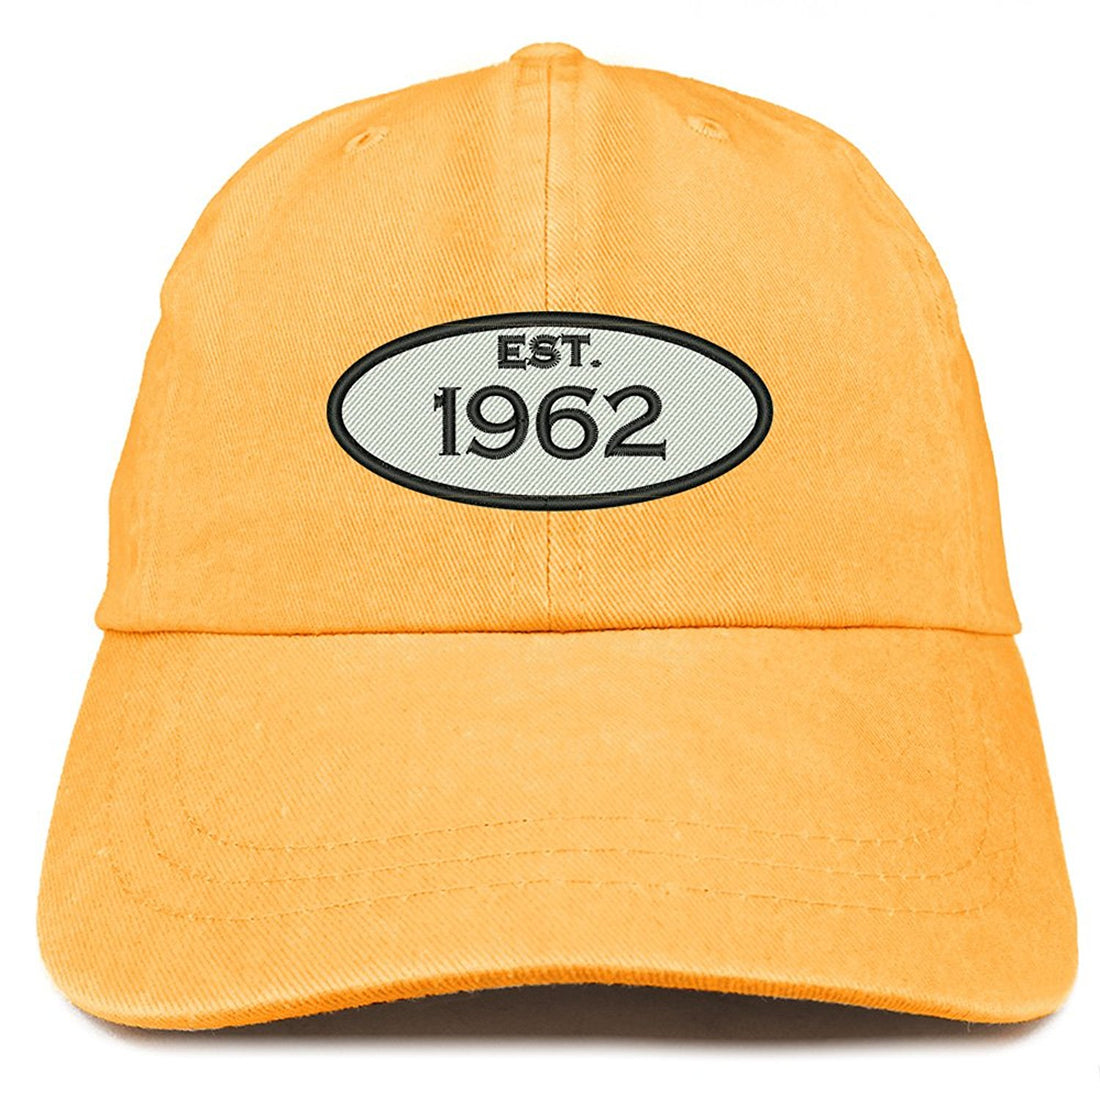 Trendy Apparel Shop Established 1962 Embroidered 57th Birthday Gift Pigment Dyed Washed Cotton Cap